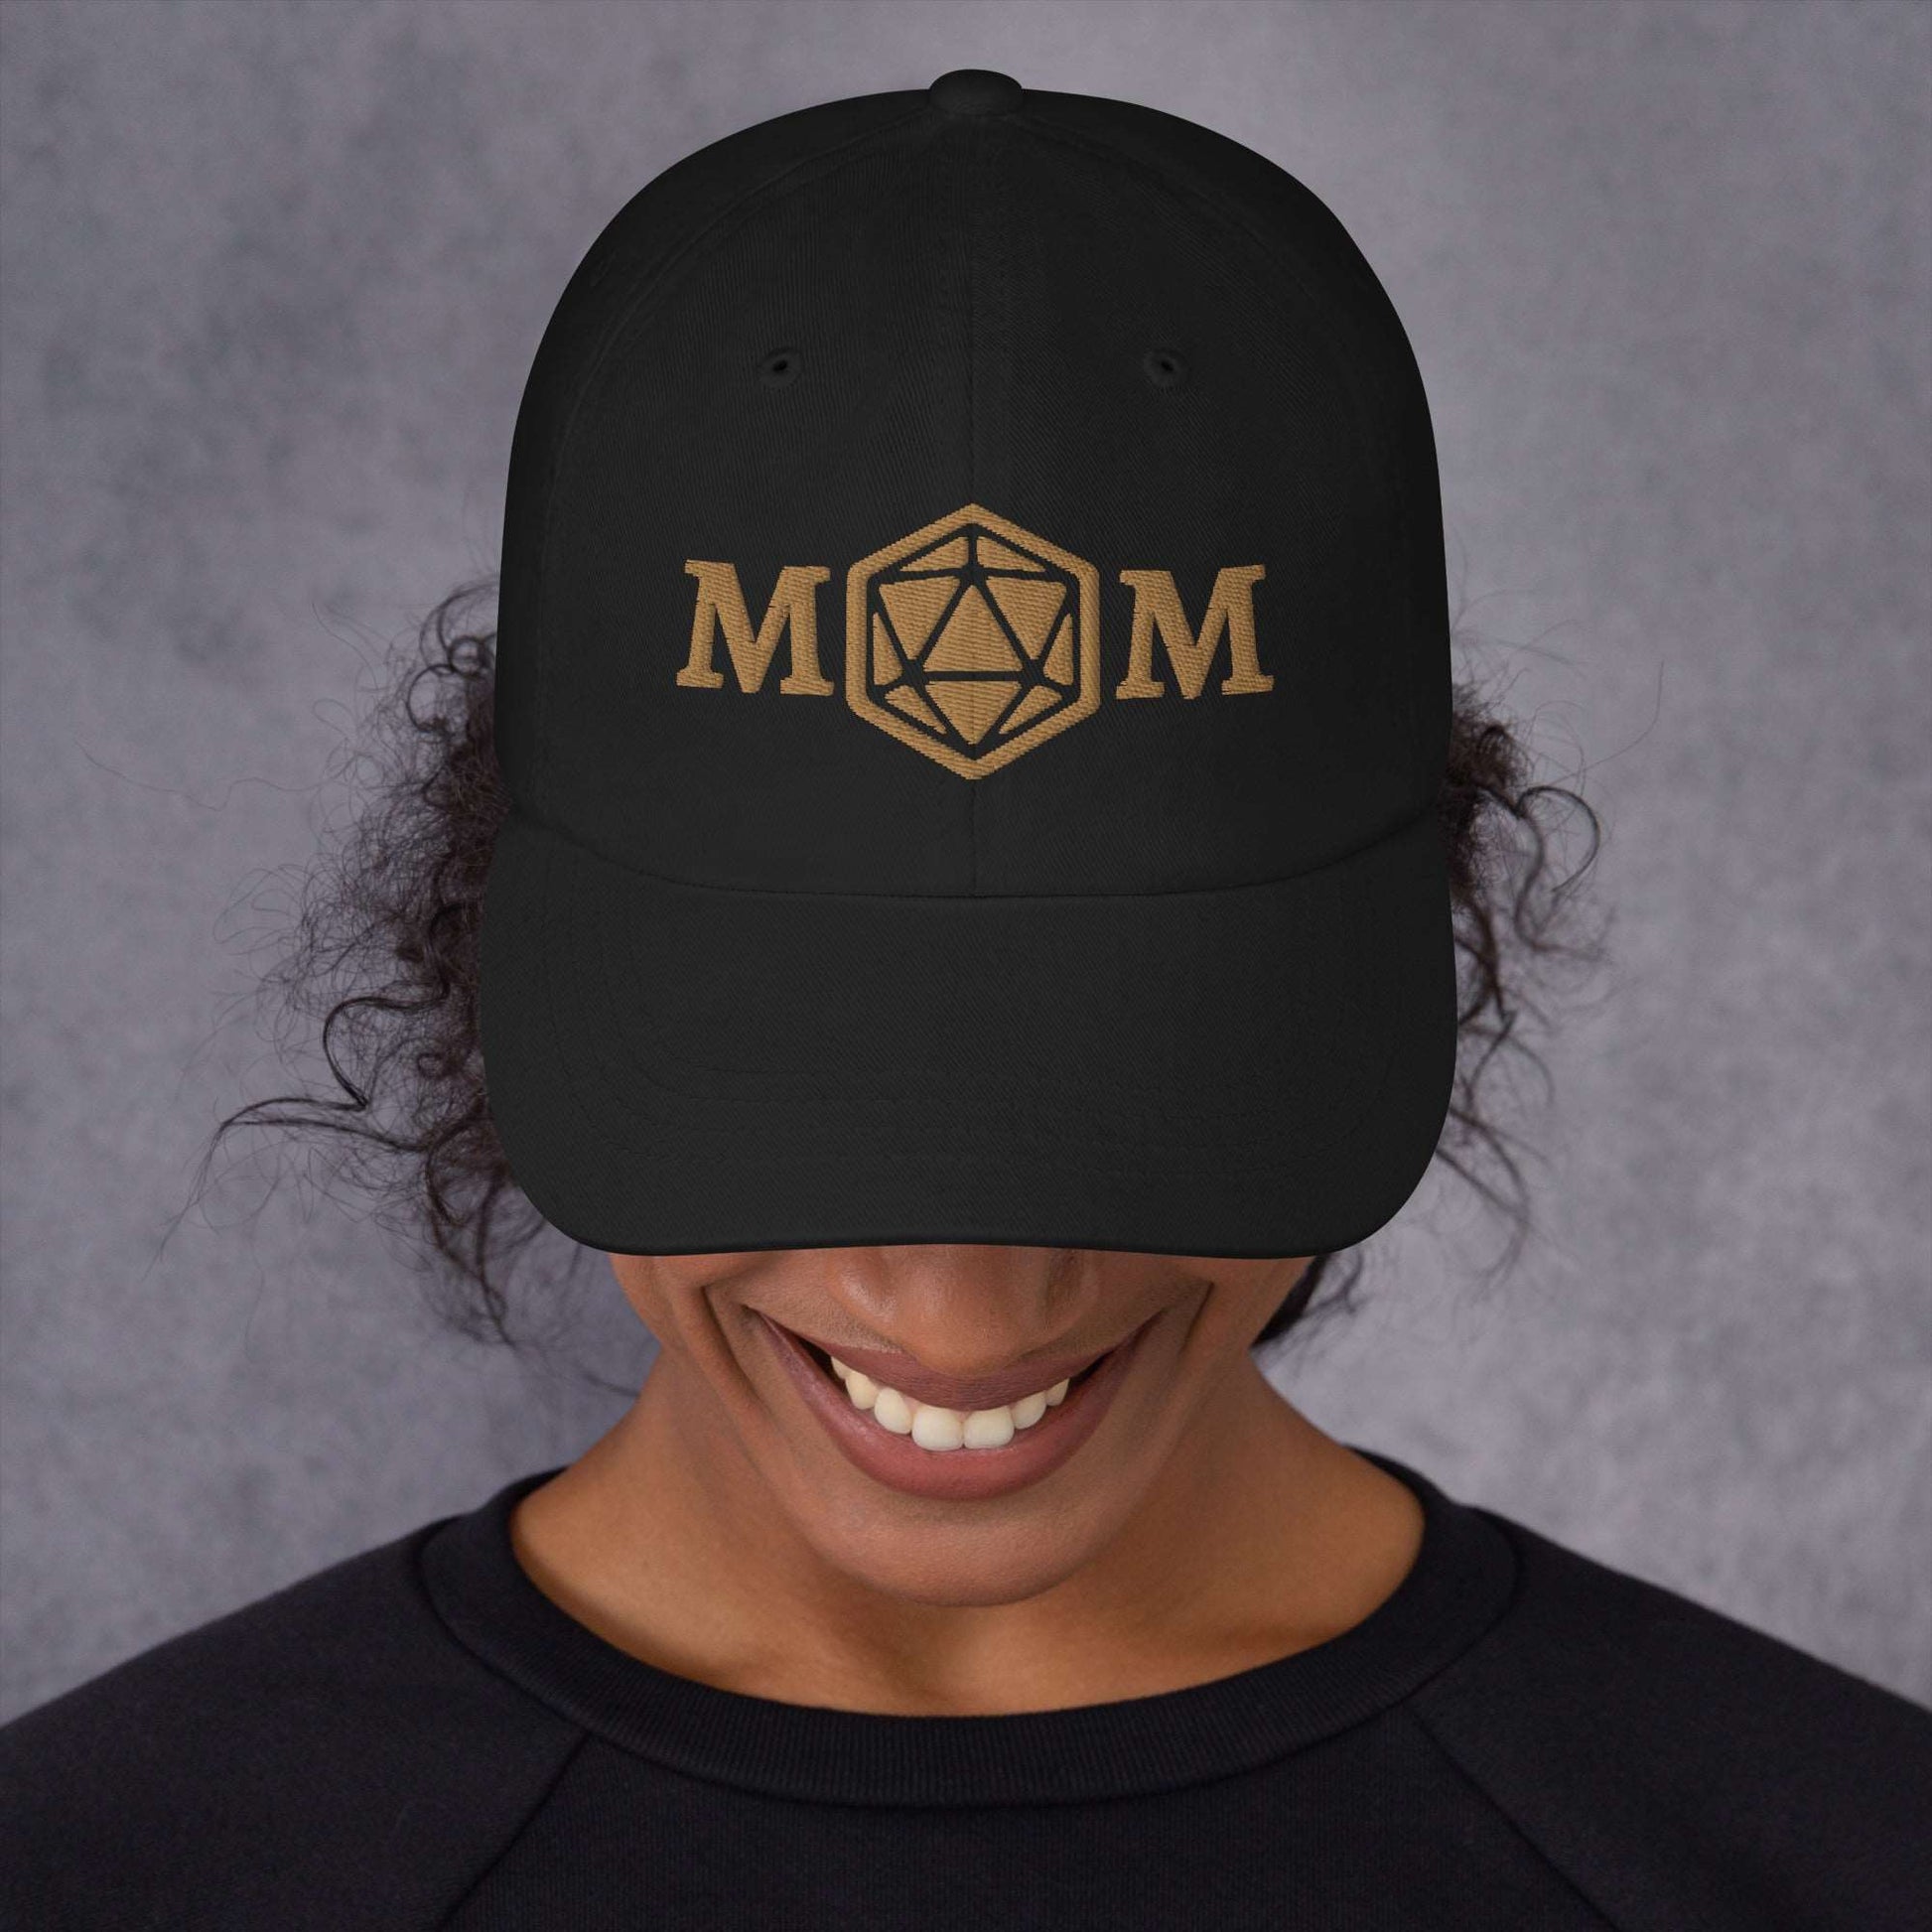 D&D Mom Hat - Embroidered D20 Cap for Gaming Mothers Hat Black